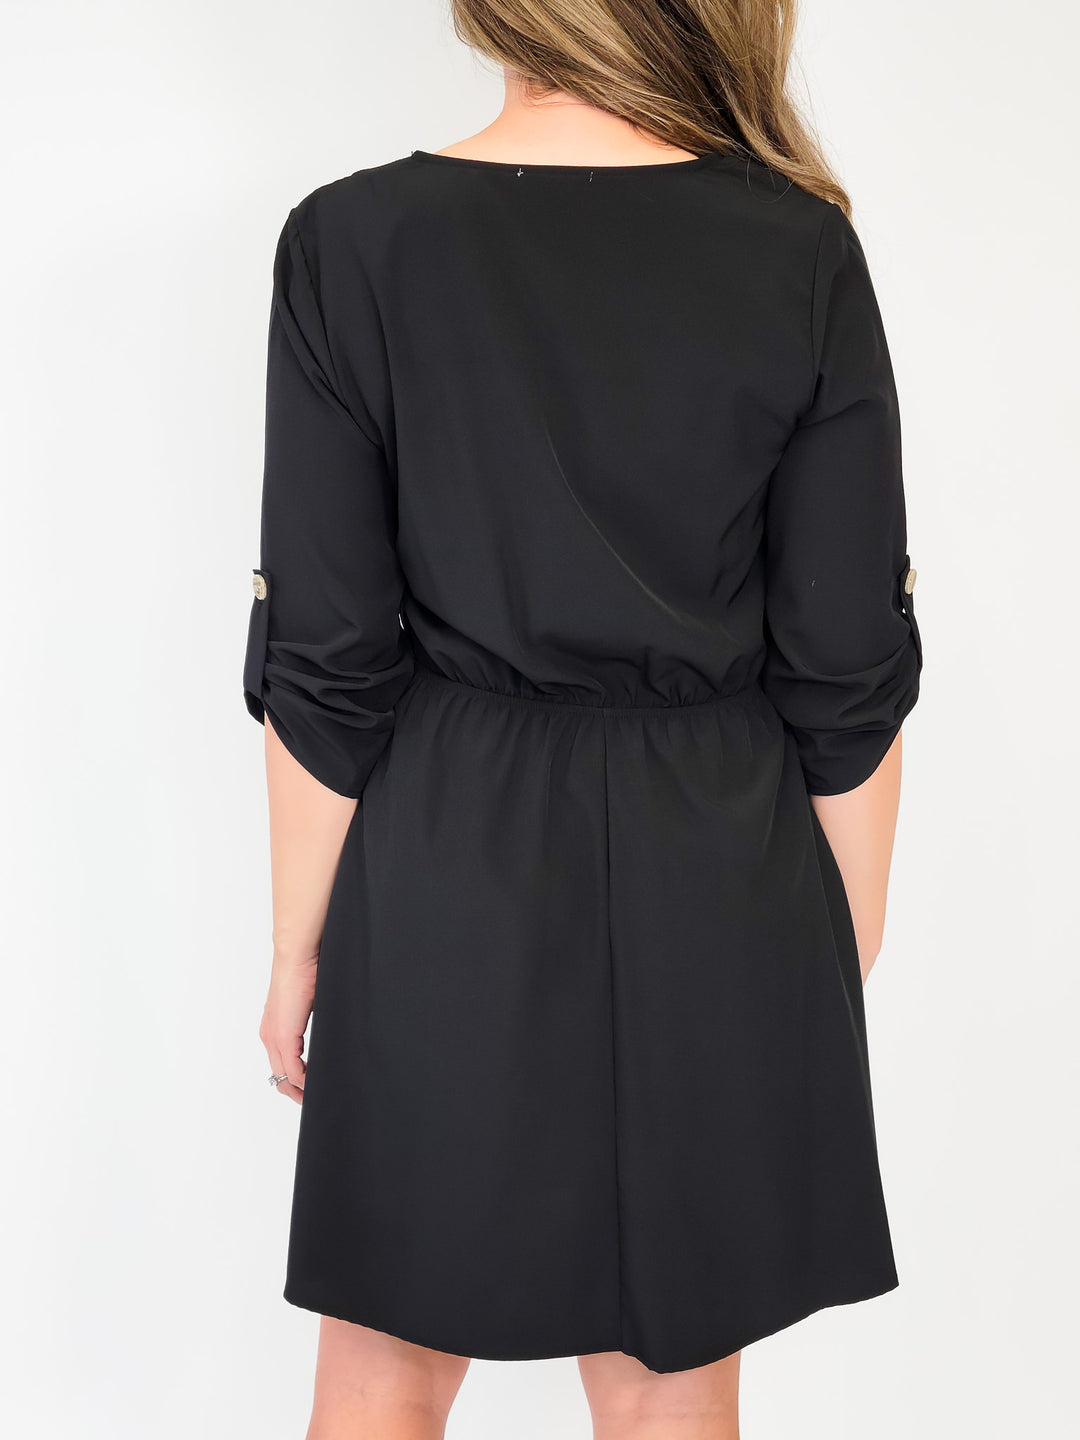 SOLID WOVEN BUTTON DRESS - BLACK